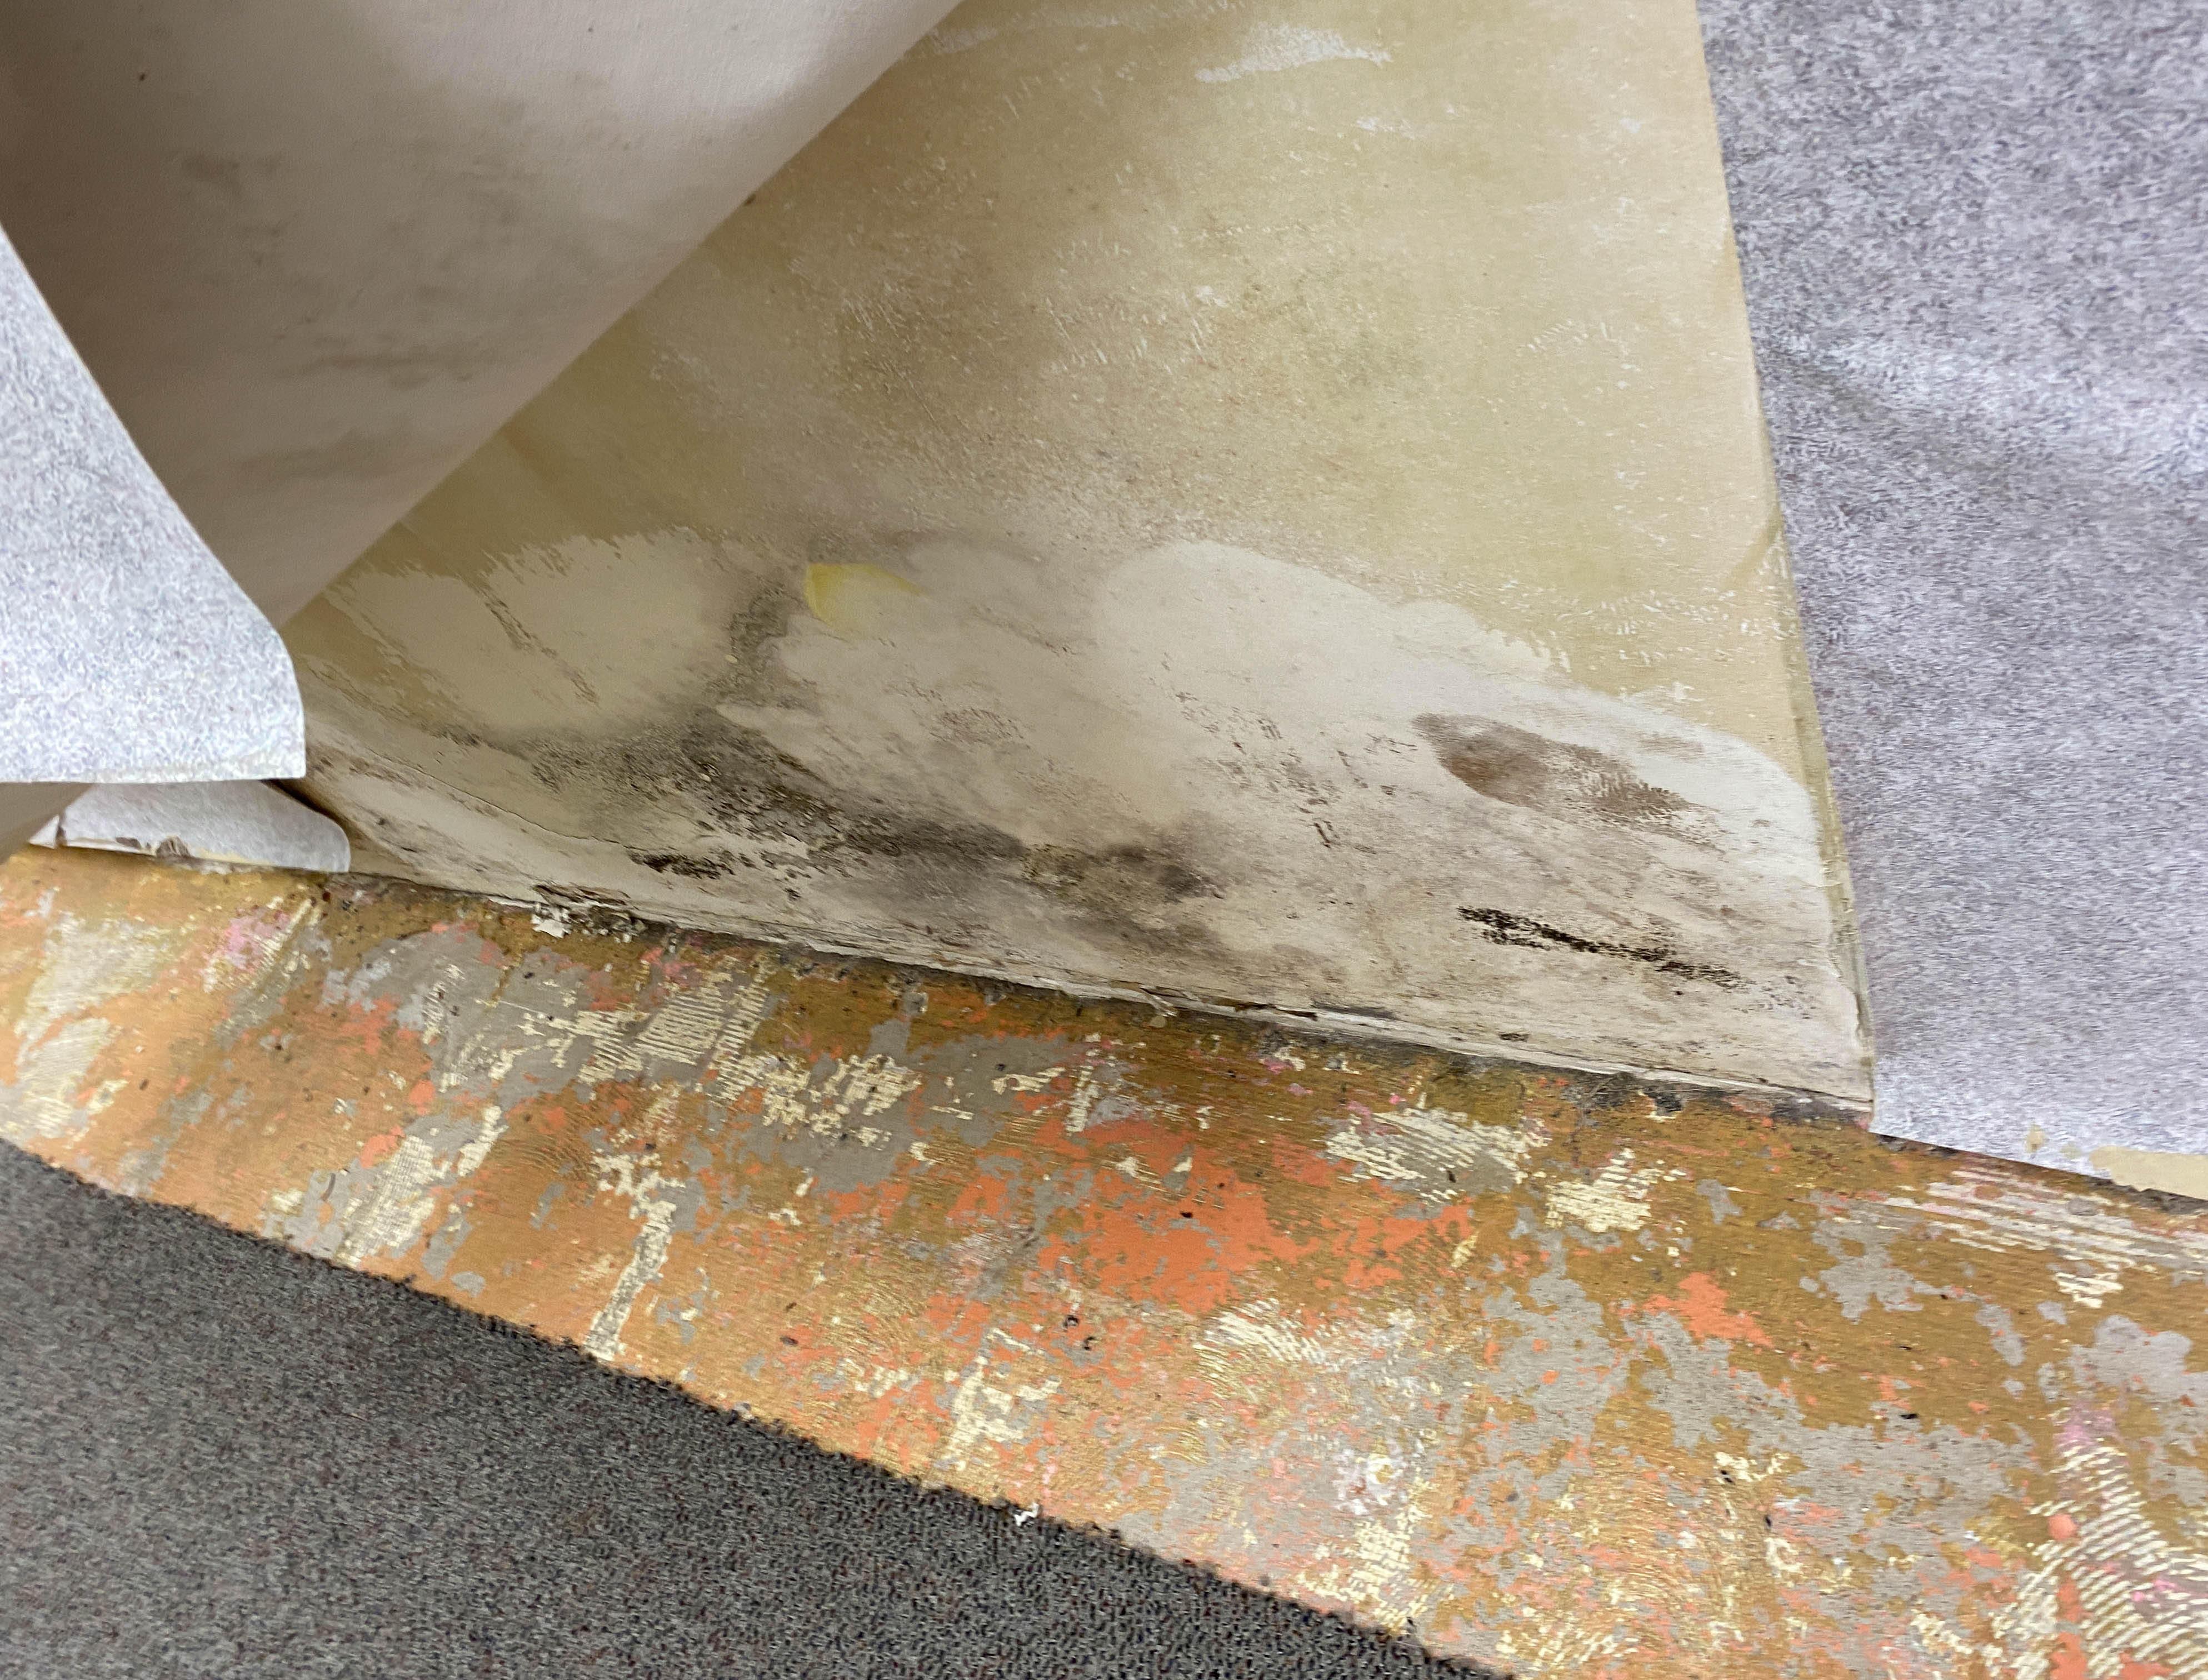 Once your home has a mold infestation, quick cleanup and remediation are vital to keeping the damage at a minimum and spreading to non-affected areas. If you have any questions or would like to schedule service for your South Laguna, CA home, please give SERVPRO of Laguna Beach / Dana Point  a call.